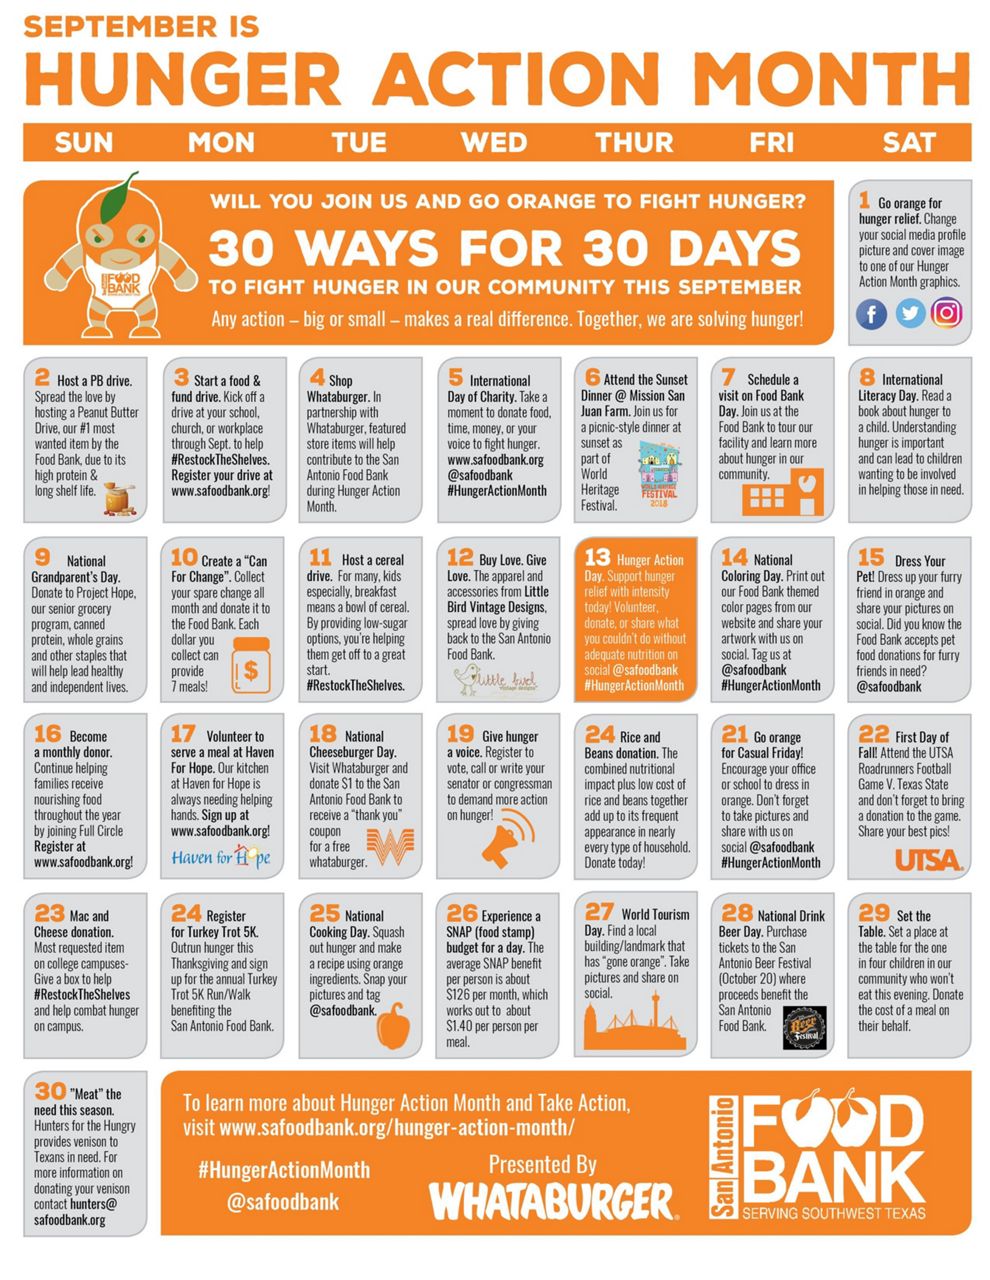 https://safoodbank.org/hunger-action-month/30ways/